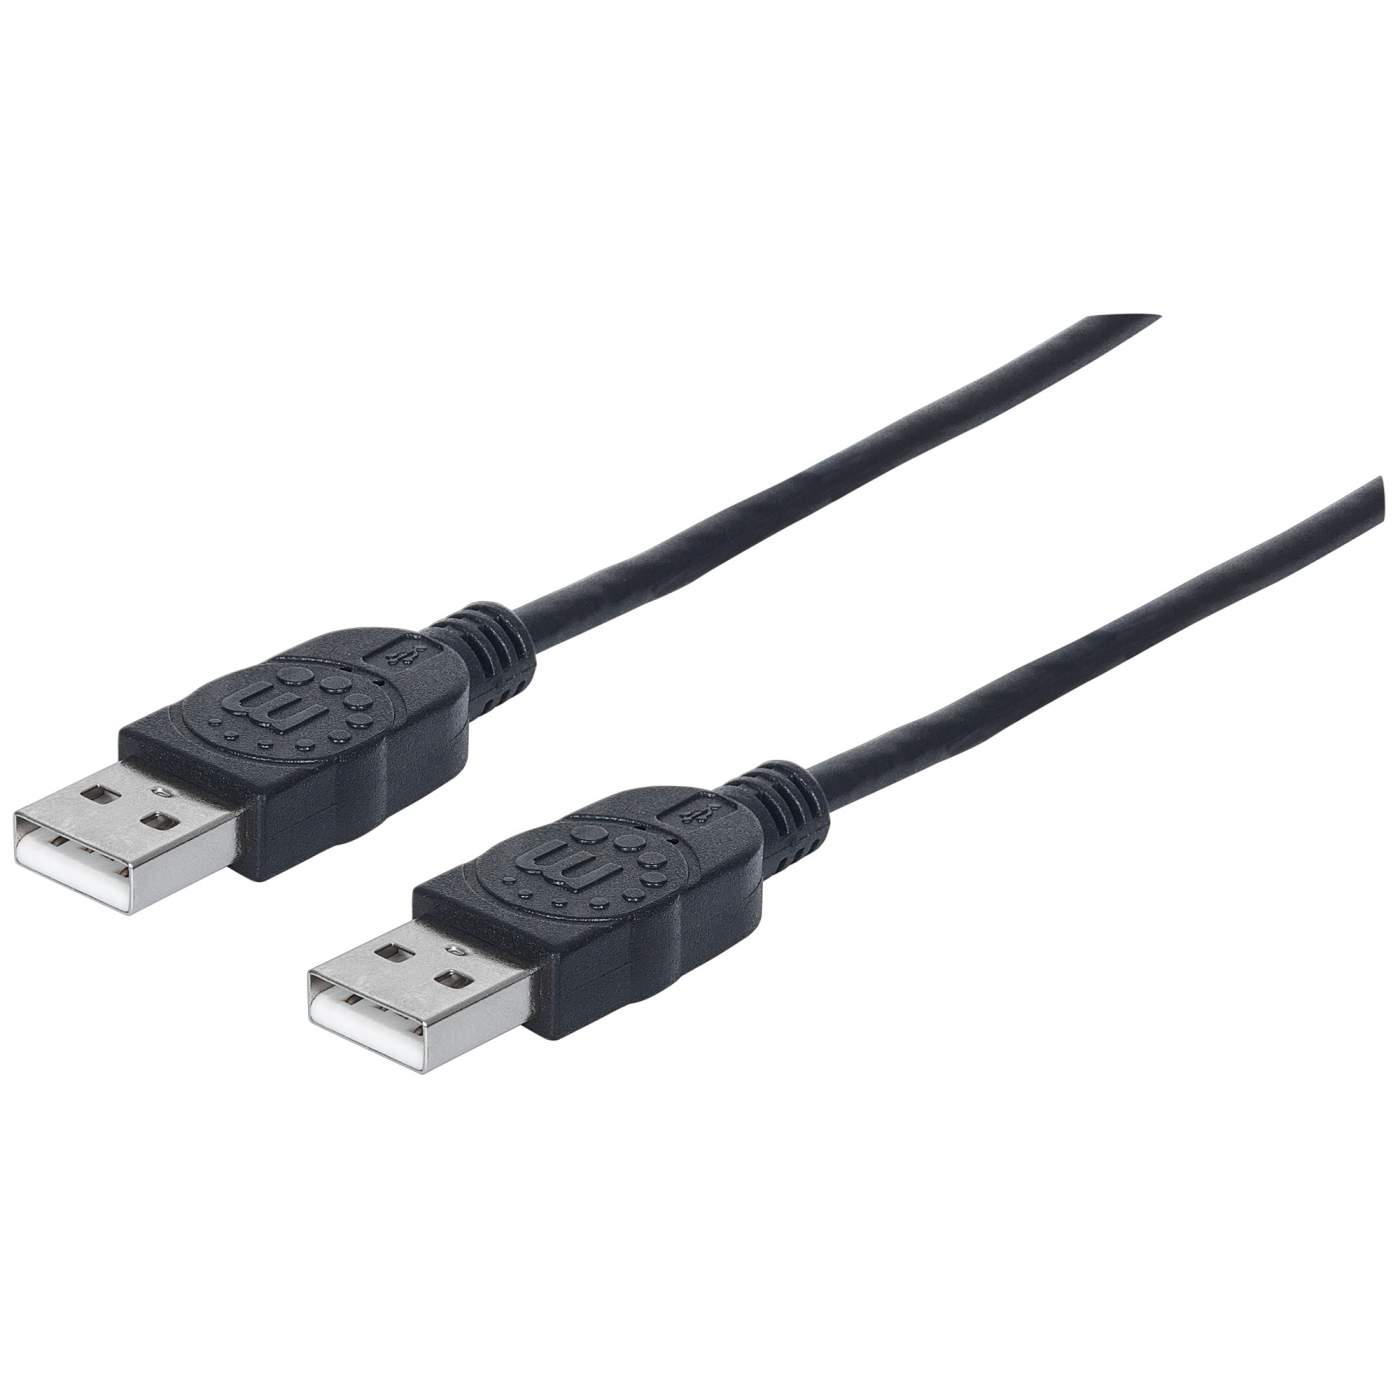 Hi-Speed USB A Device Cable Image 1